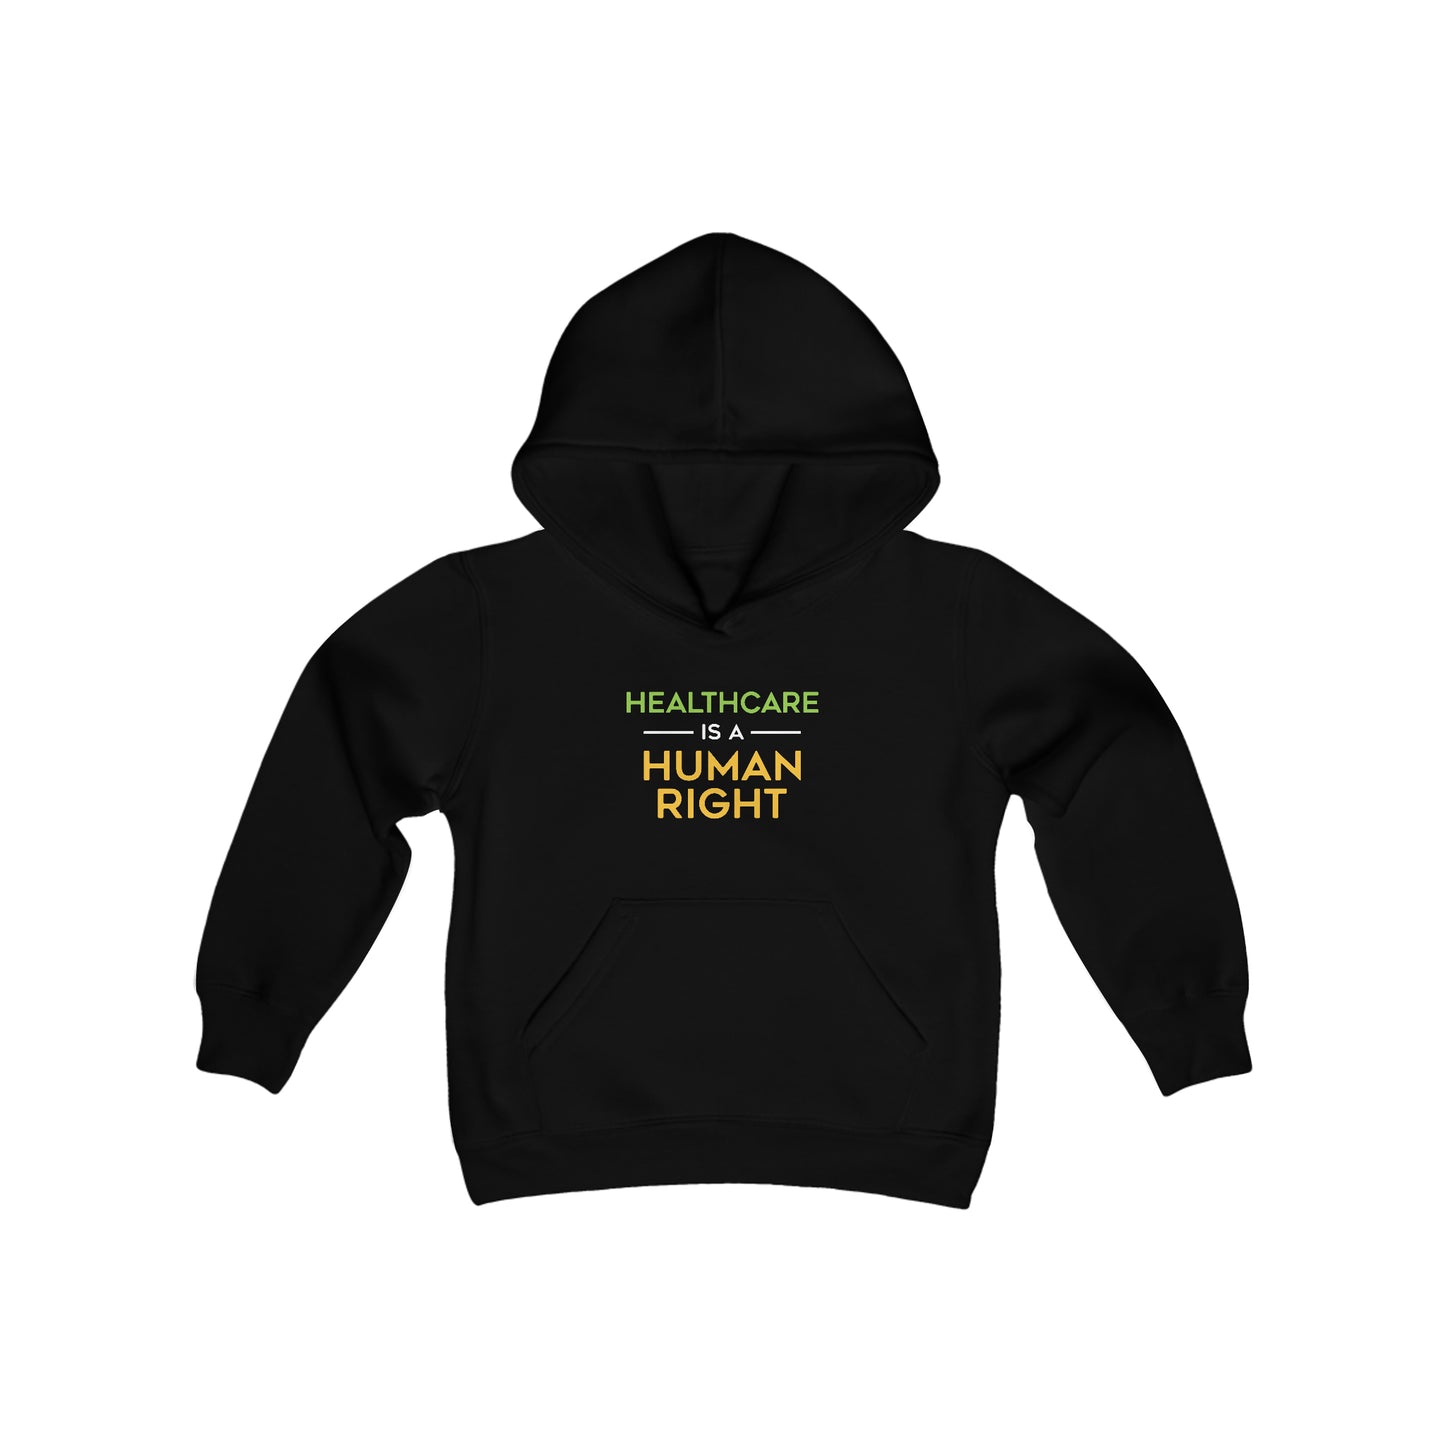 “Healthcare Is A Human Right” Youth Hoodie